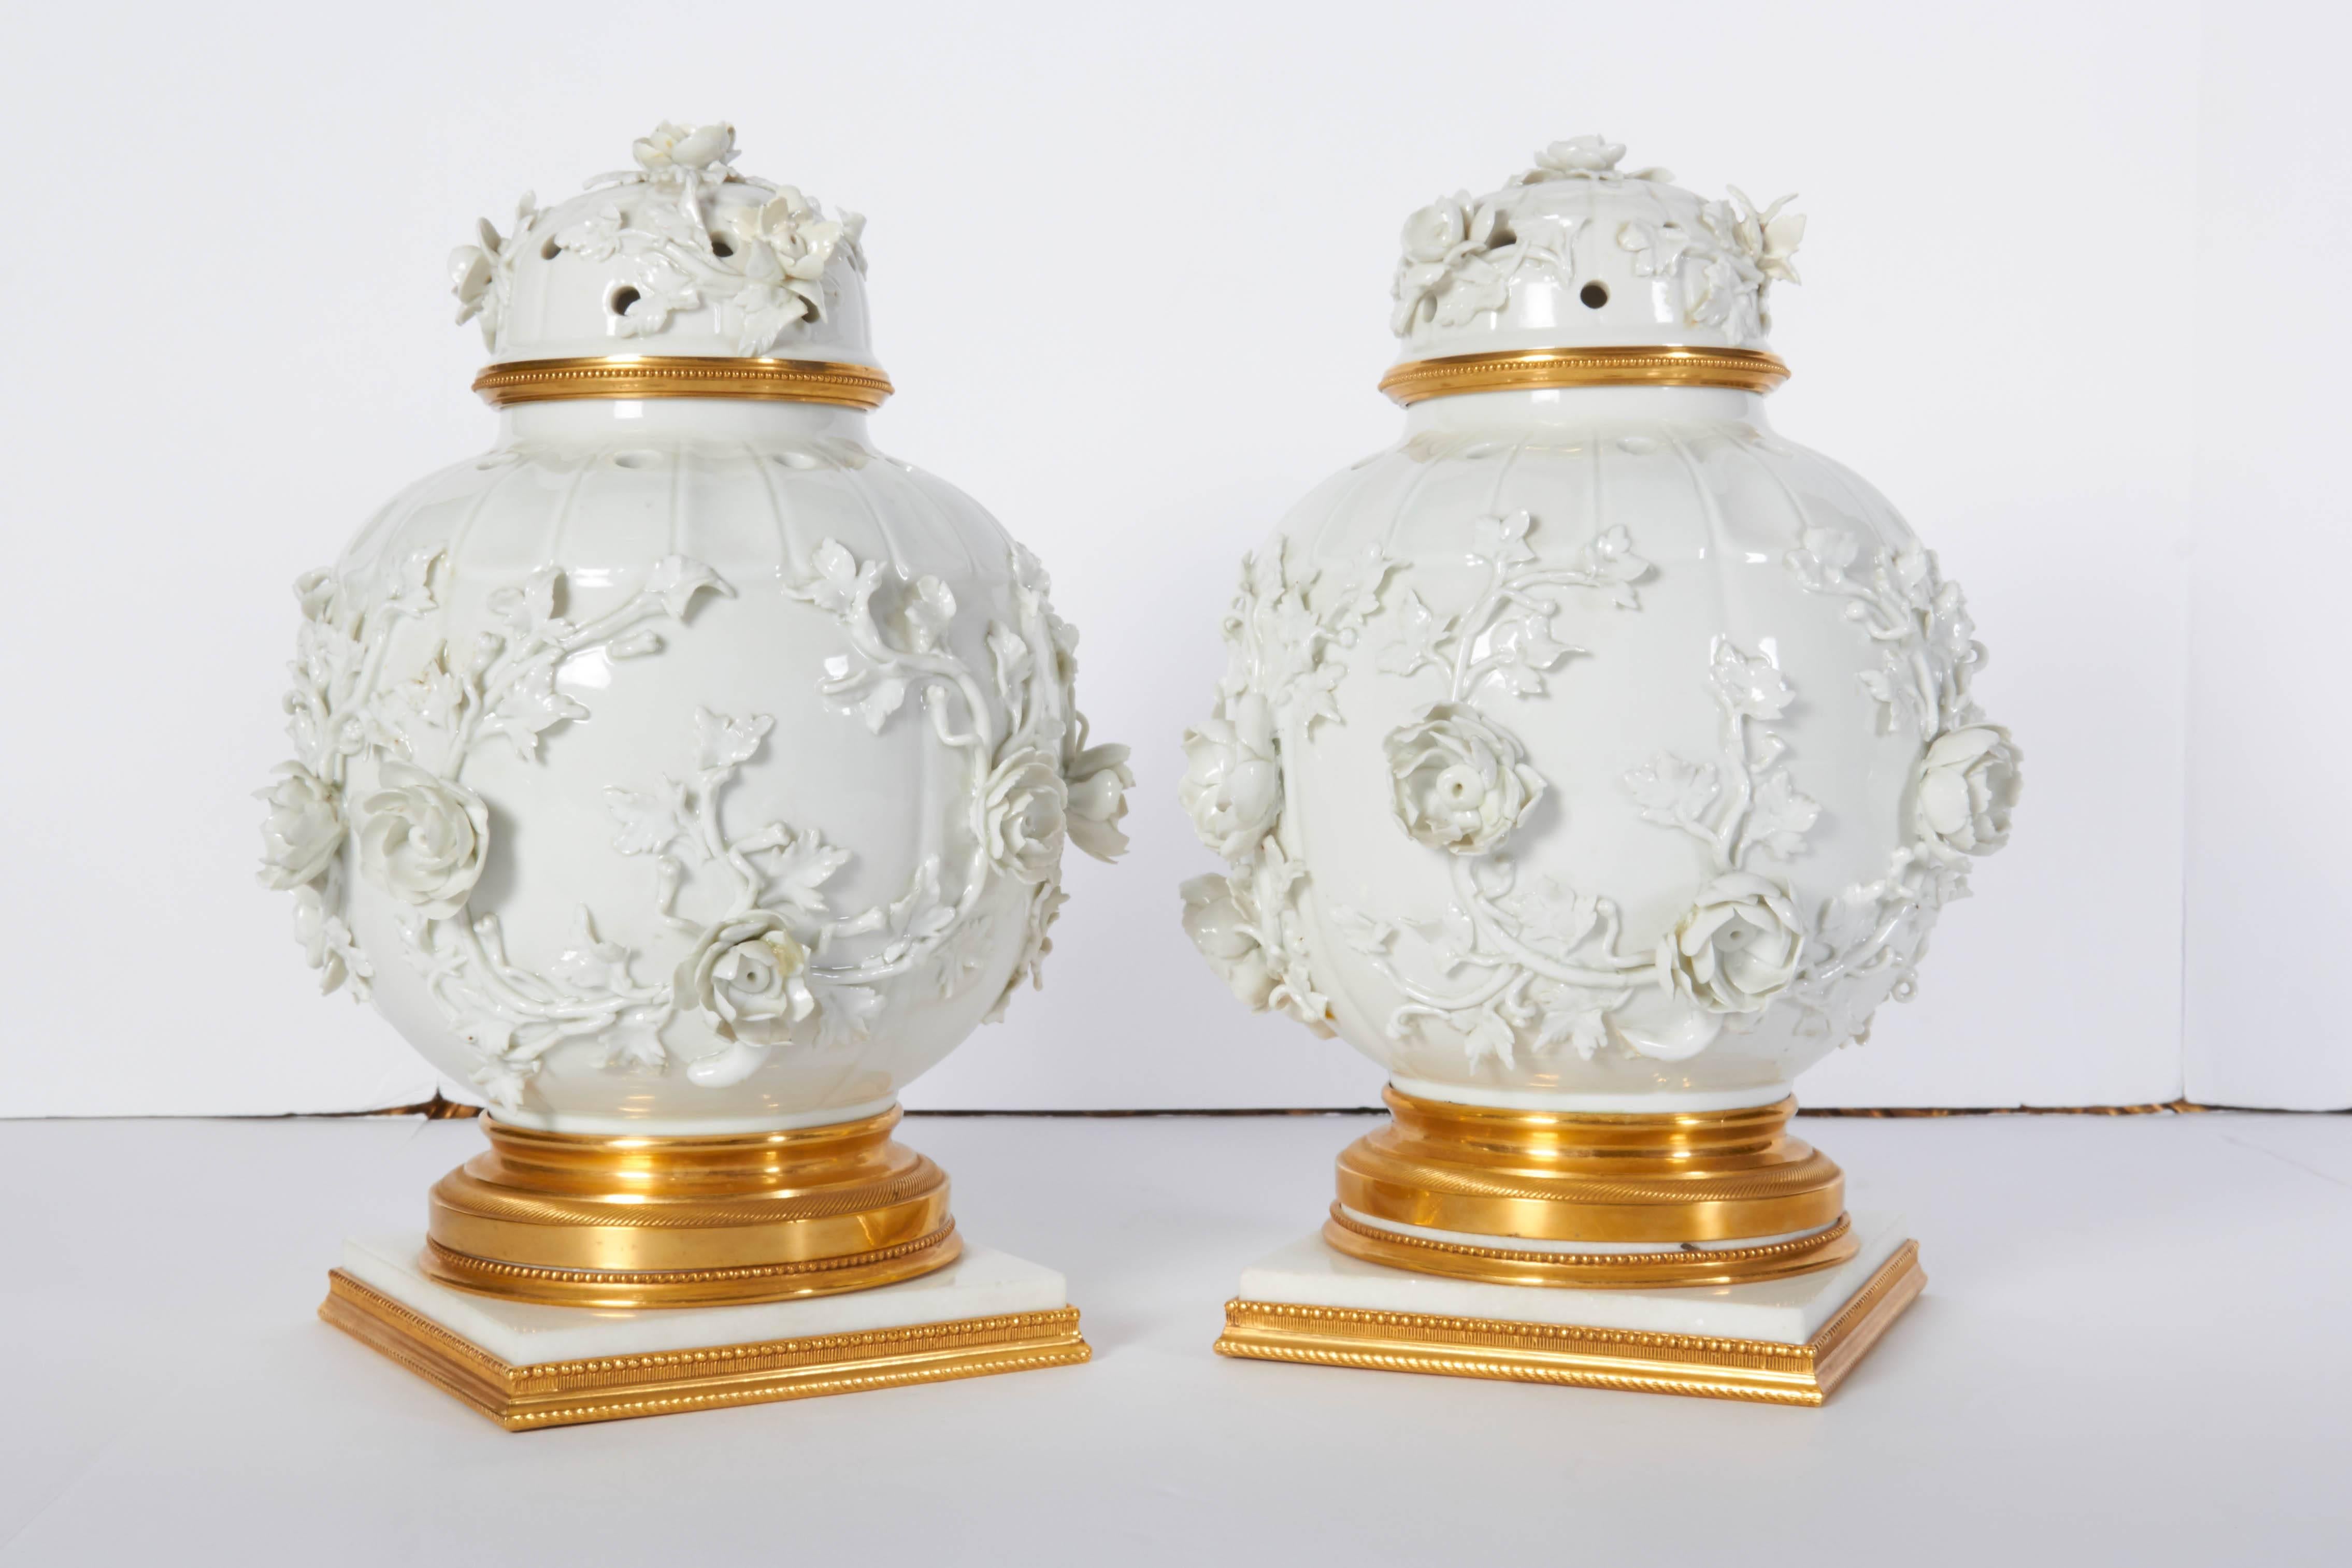 19th Century Chinese Blanc de Chine Porcelain & Ormolu-Mounted Potpouri Vases and Cover, Pair